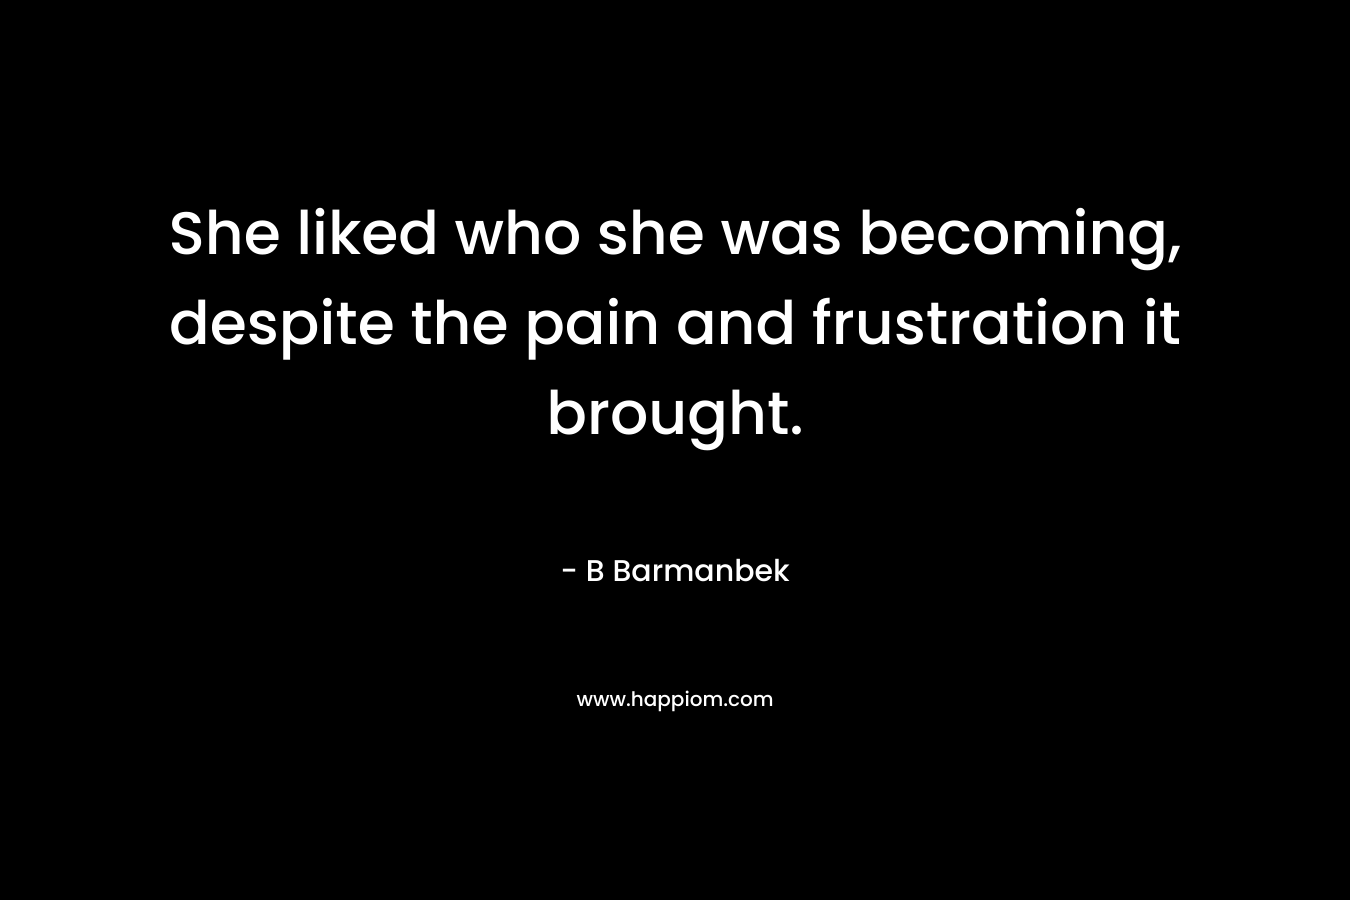 She liked who she was becoming, despite the pain and frustration it brought. – B Barmanbek